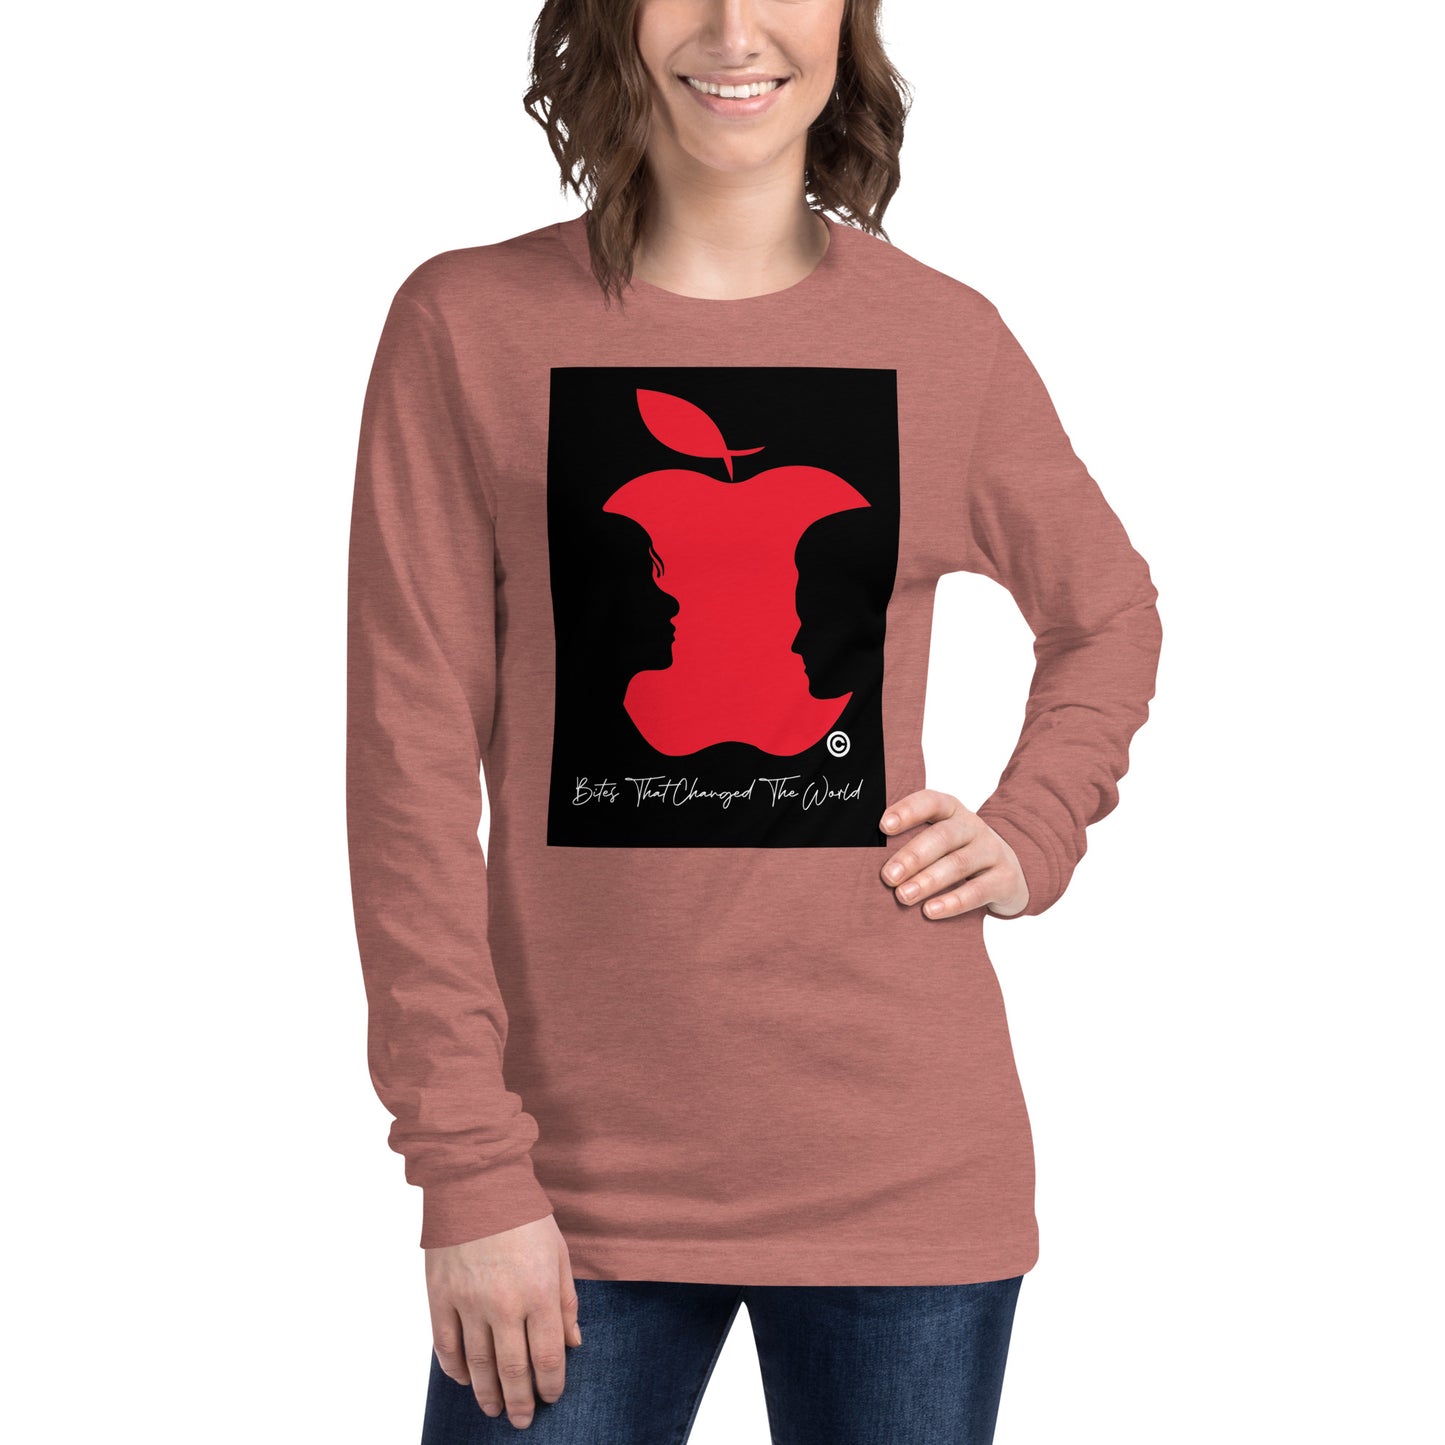 Bites That Changed the World Women's Long Sleeve Tee